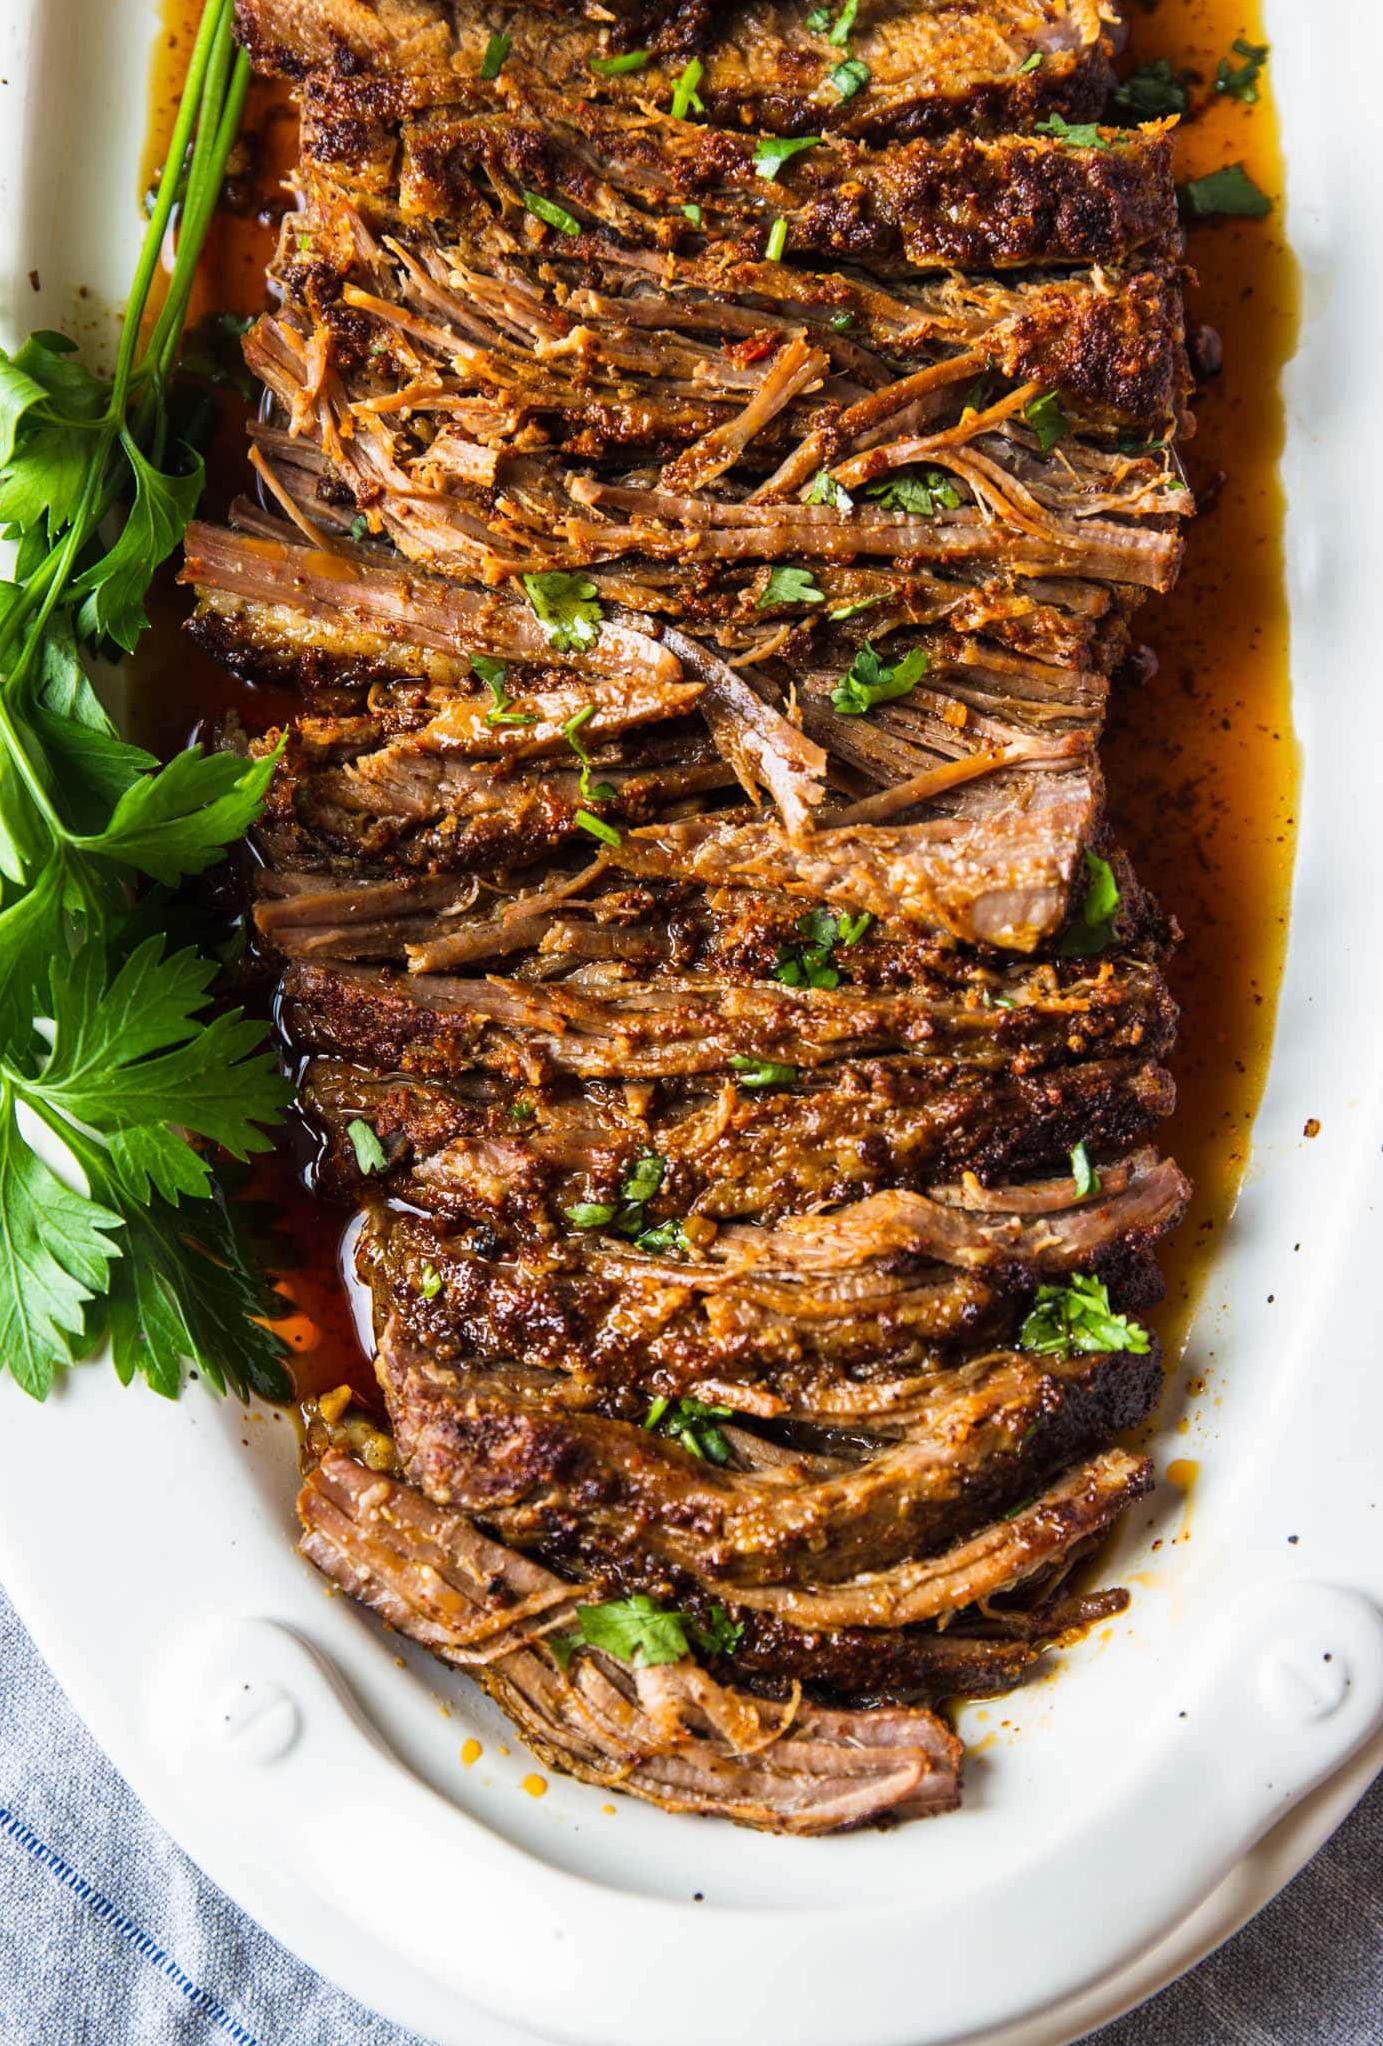  Delicious and healthy alternative to traditional beef recipes